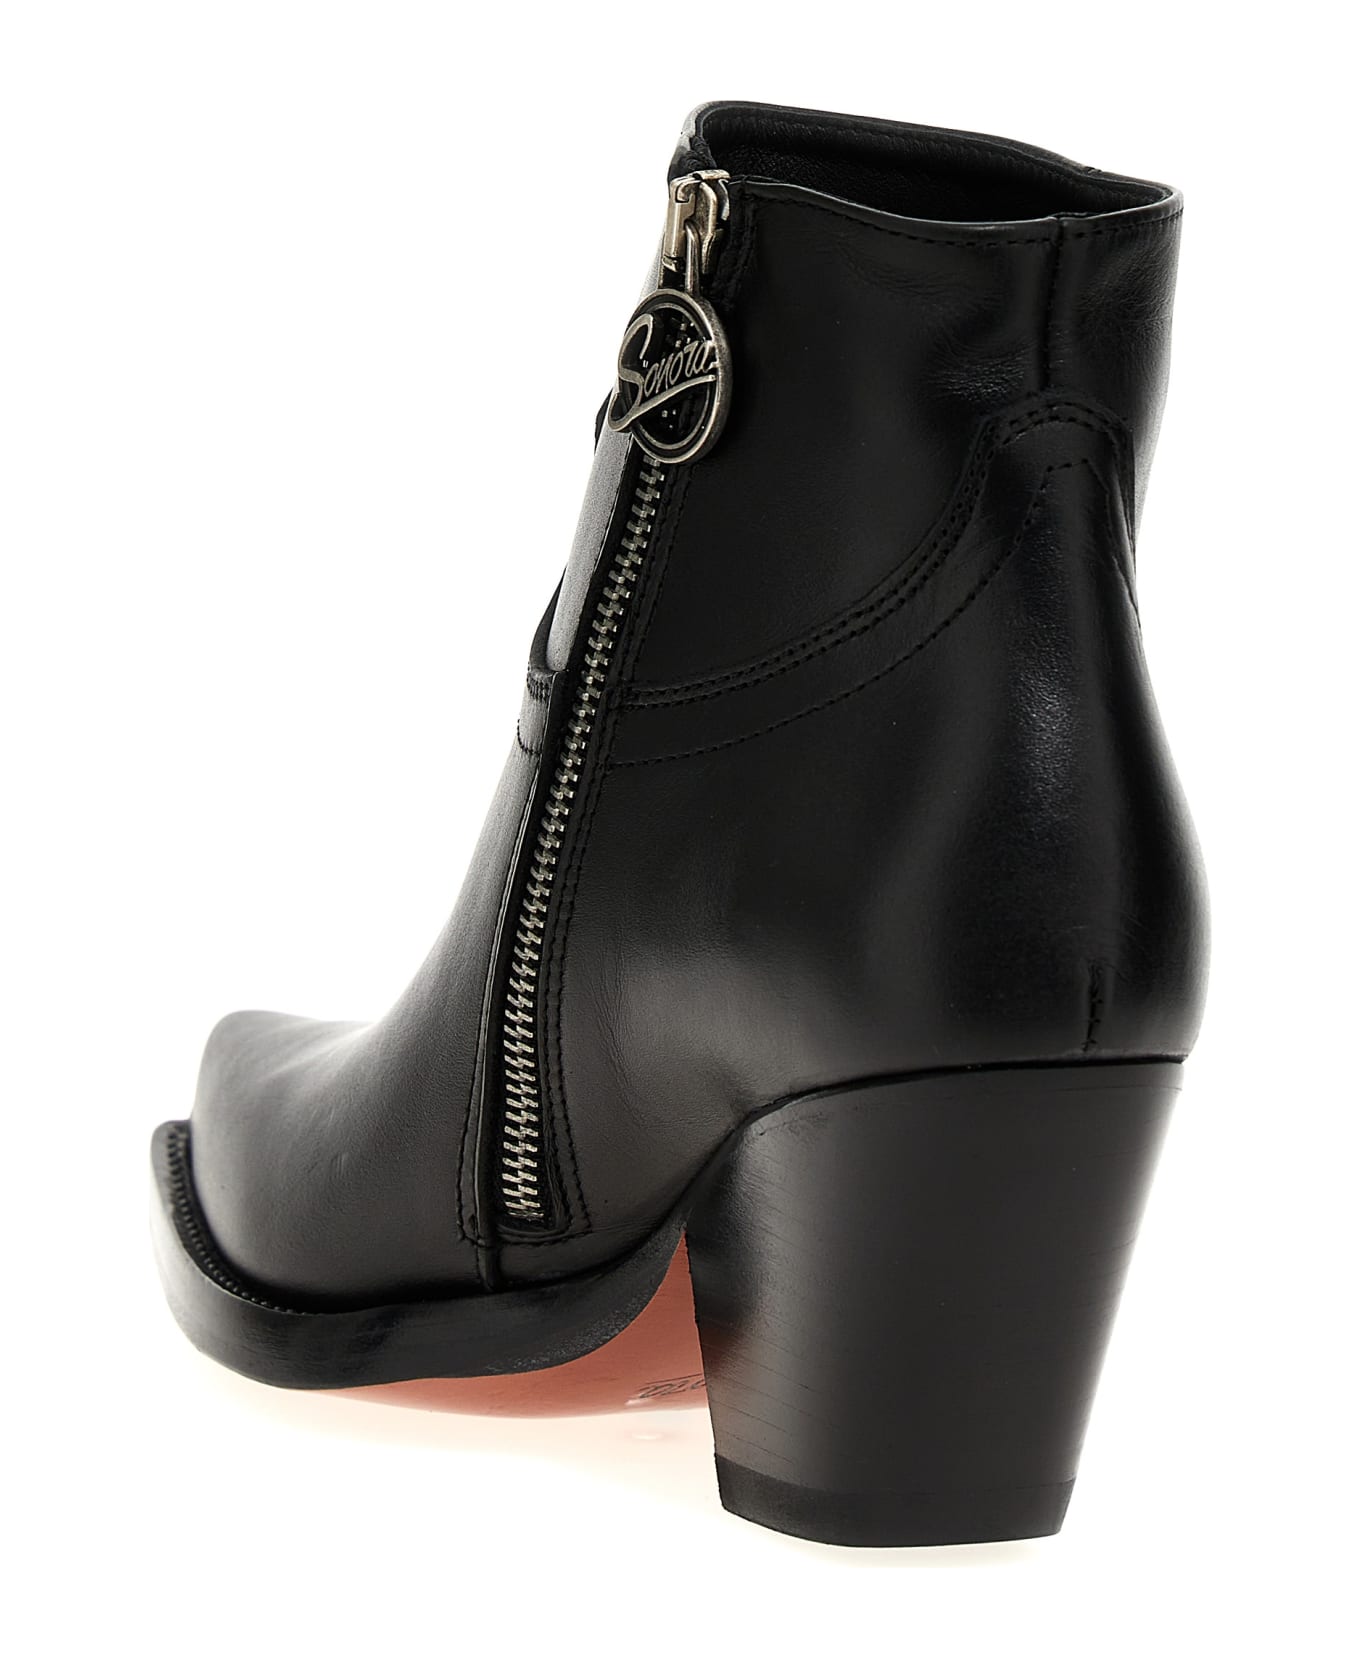 Sonora 'jalapeno' Ankle Boots - Black  